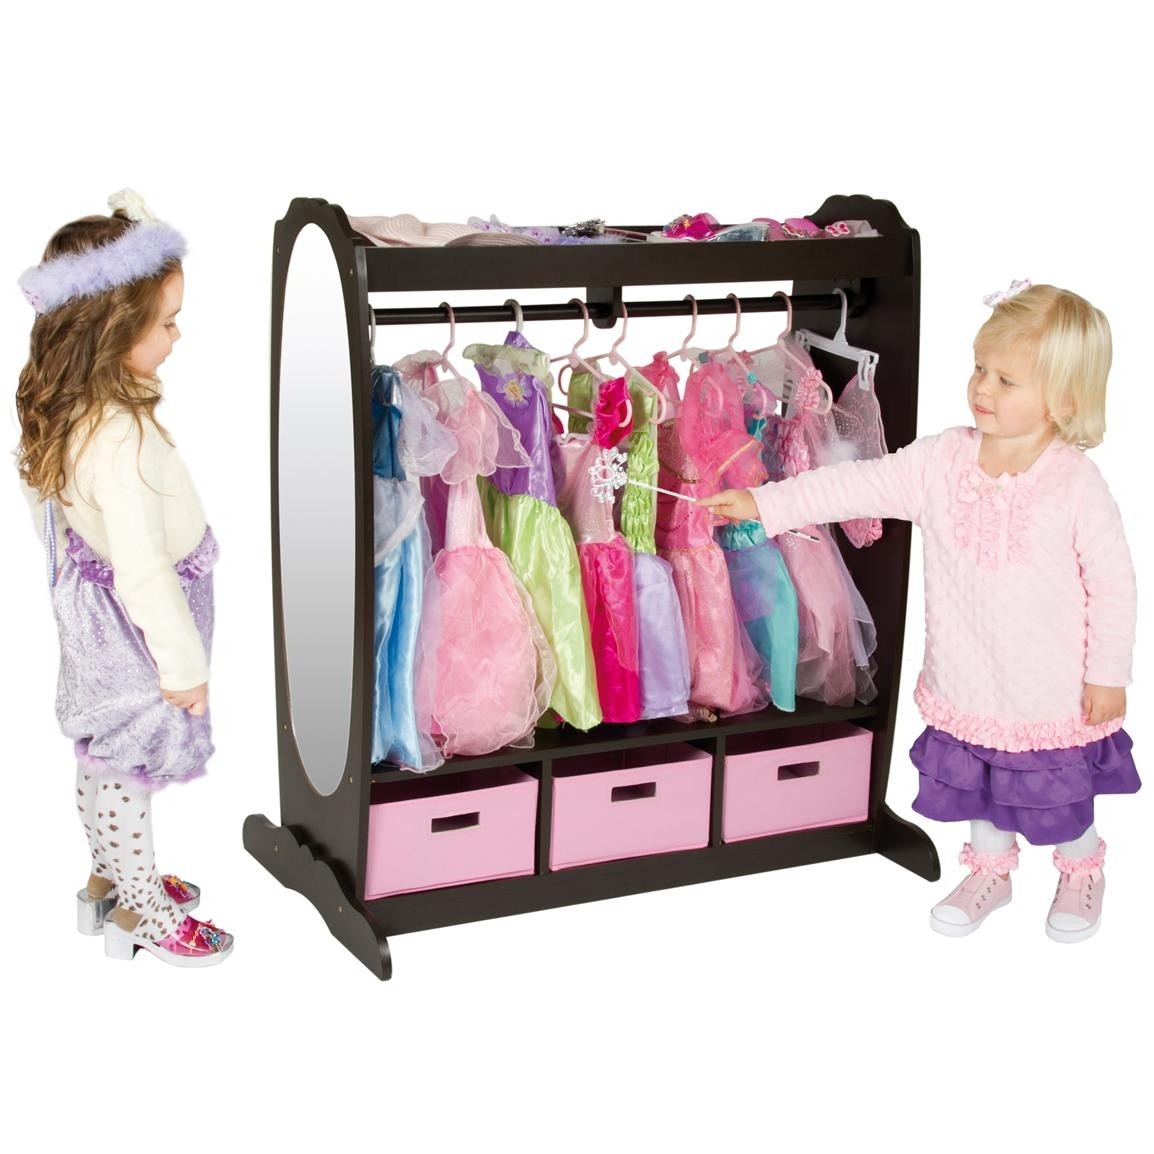 Guidecraft r dress up storage center 234969 toys at